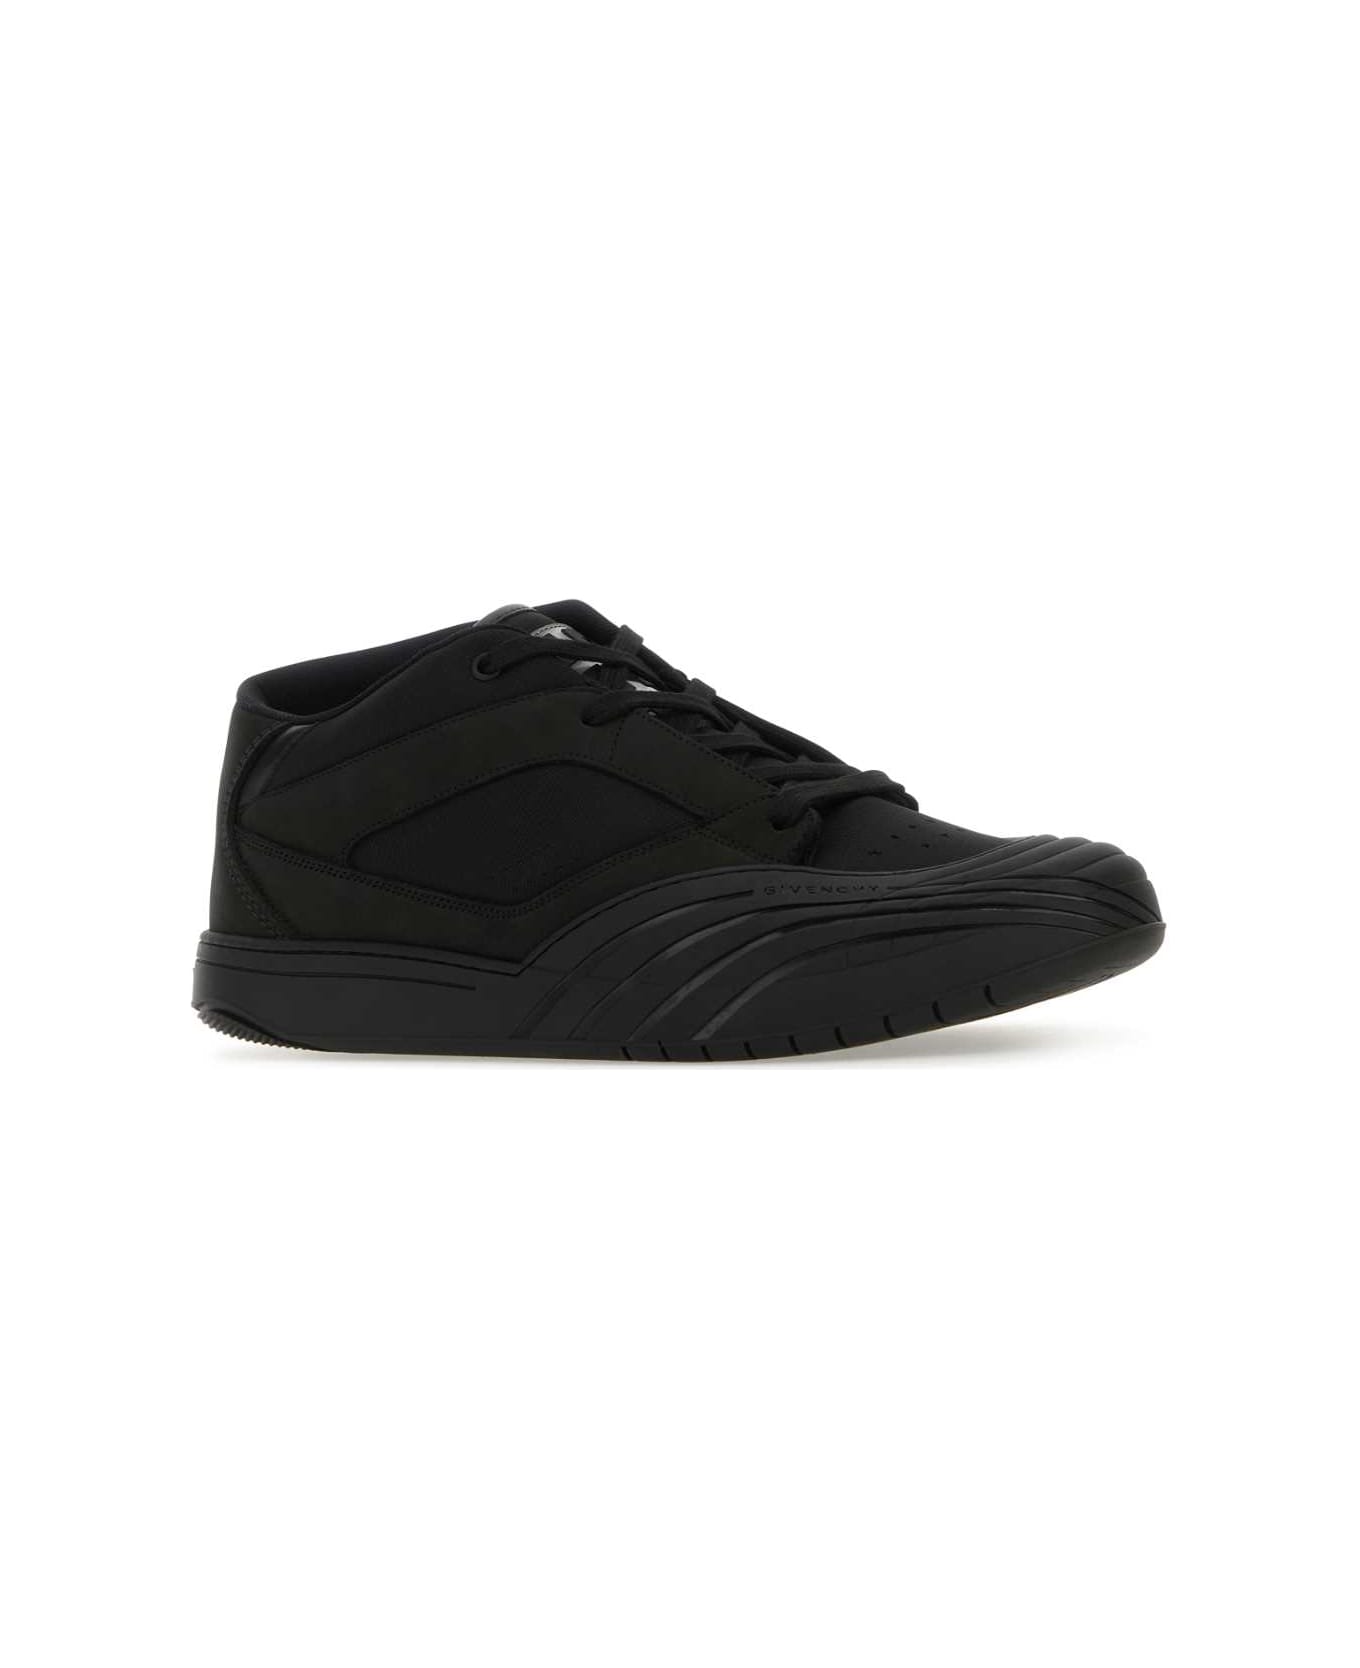 Givenchy Black Fabric And Leather Skate Sneakers - Black